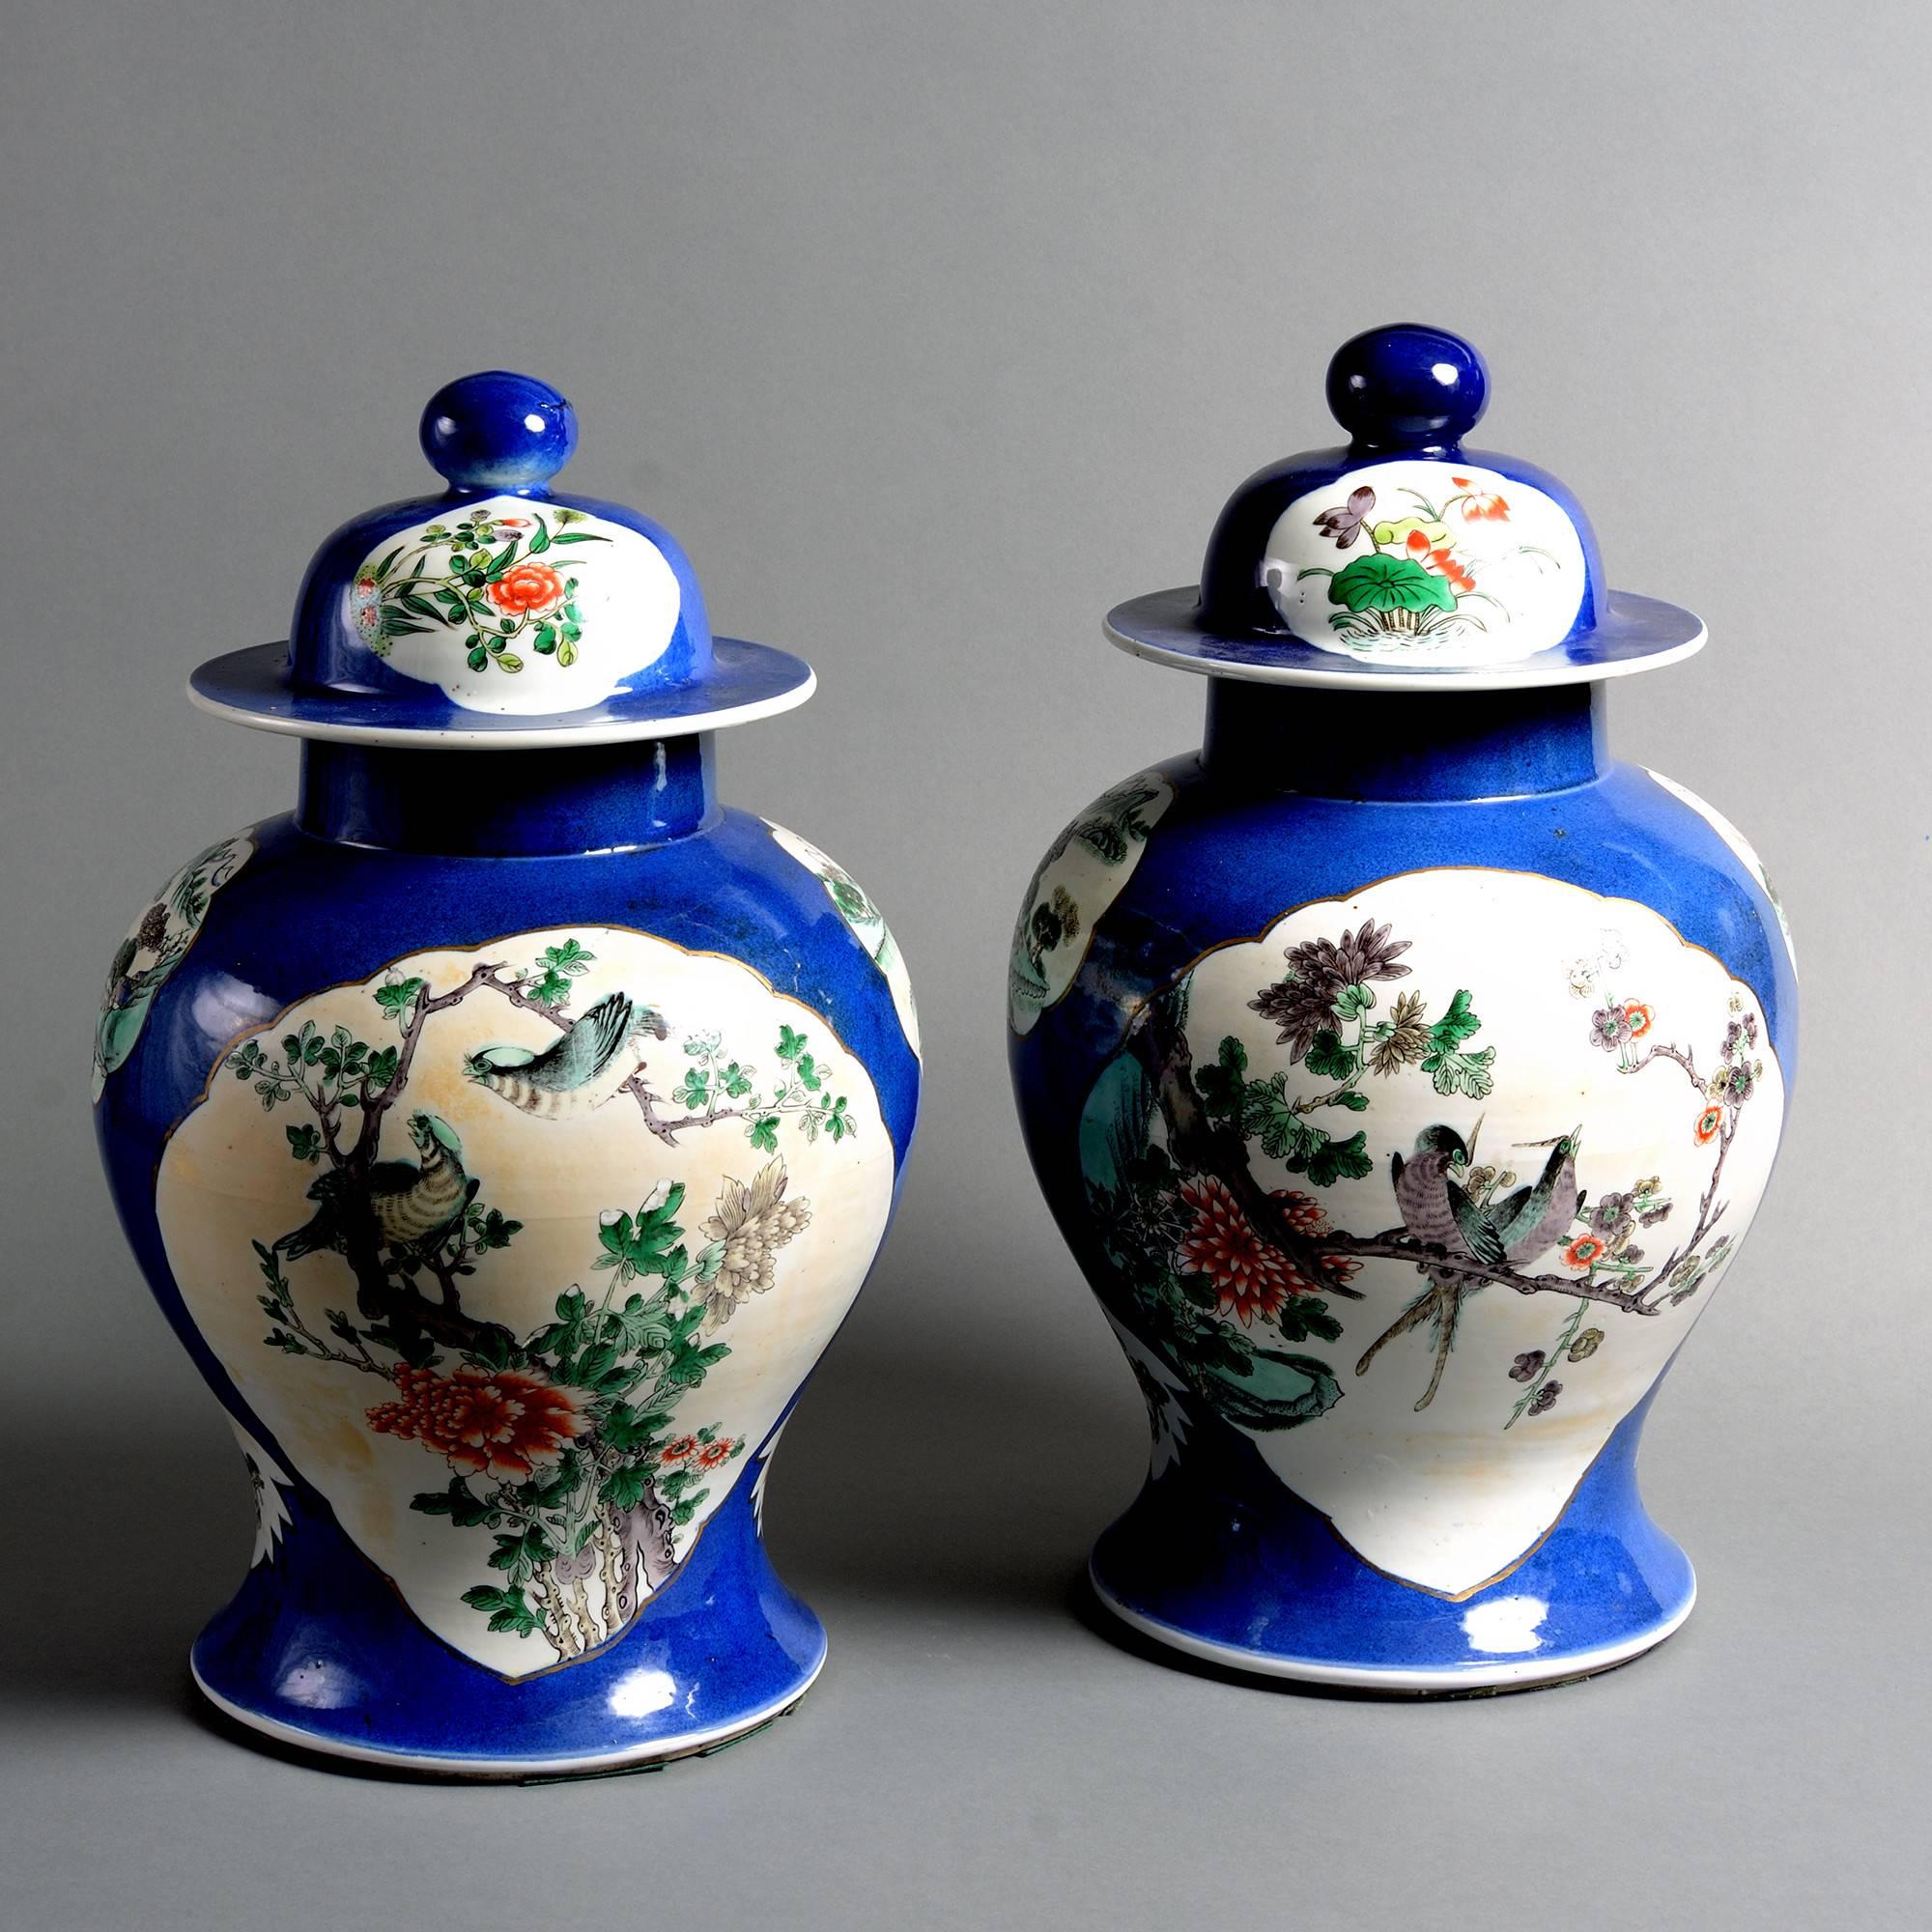 A pair of 19th century porcelain baluster vases and covers, each with cartouches of birds and flowers set upon a powder blue ground.

Qing Dynasty, Tongzhi period.

One rim crack and hairline restored to neck.